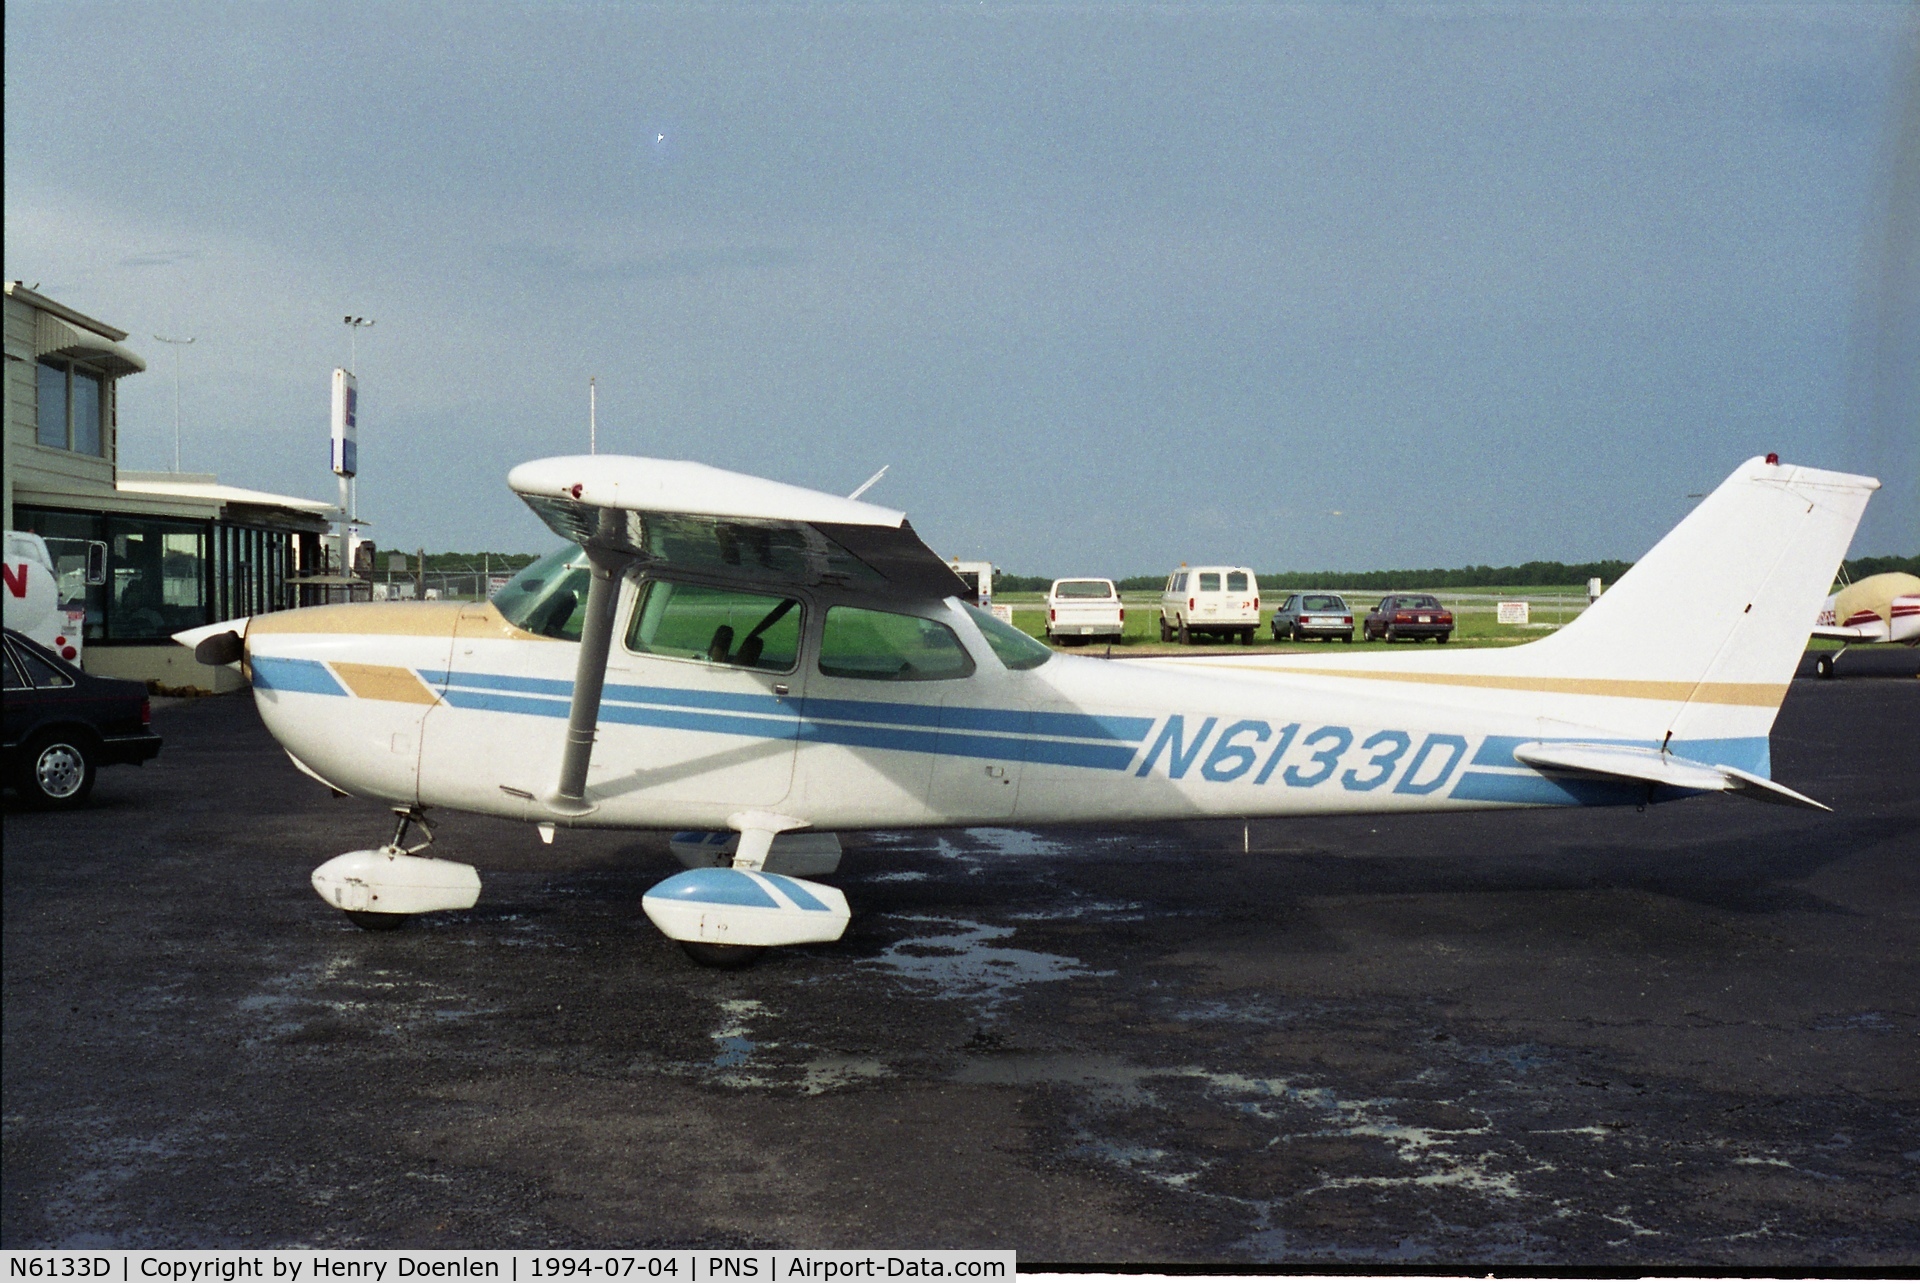 N6133D, 1979 Cessna 172N C/N 17272611, N6133D was a proud family airplane from 1986 to 2003